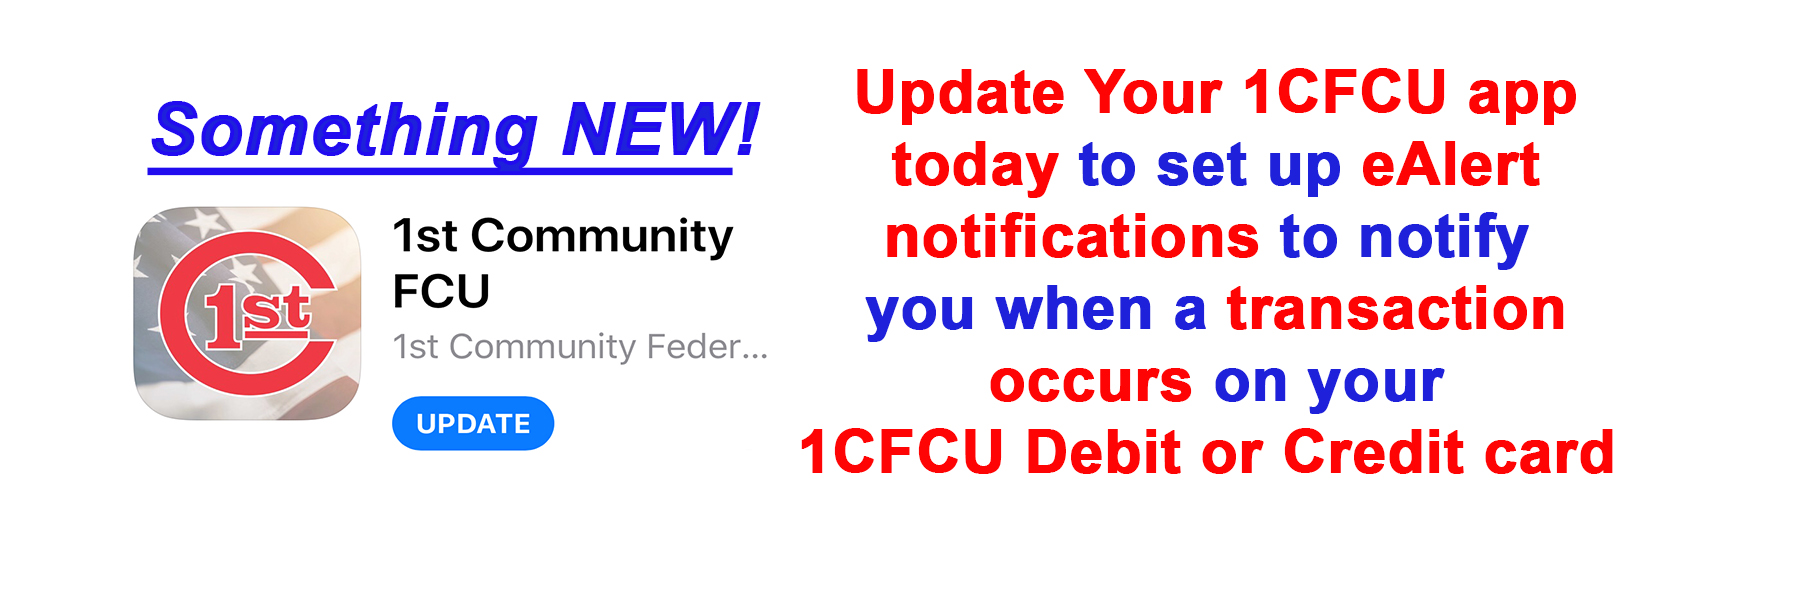 Update your 1CFCU app today to set up eAlert notifications to notify you when a transaction occurs on your 1CFCU Debit or Credit card